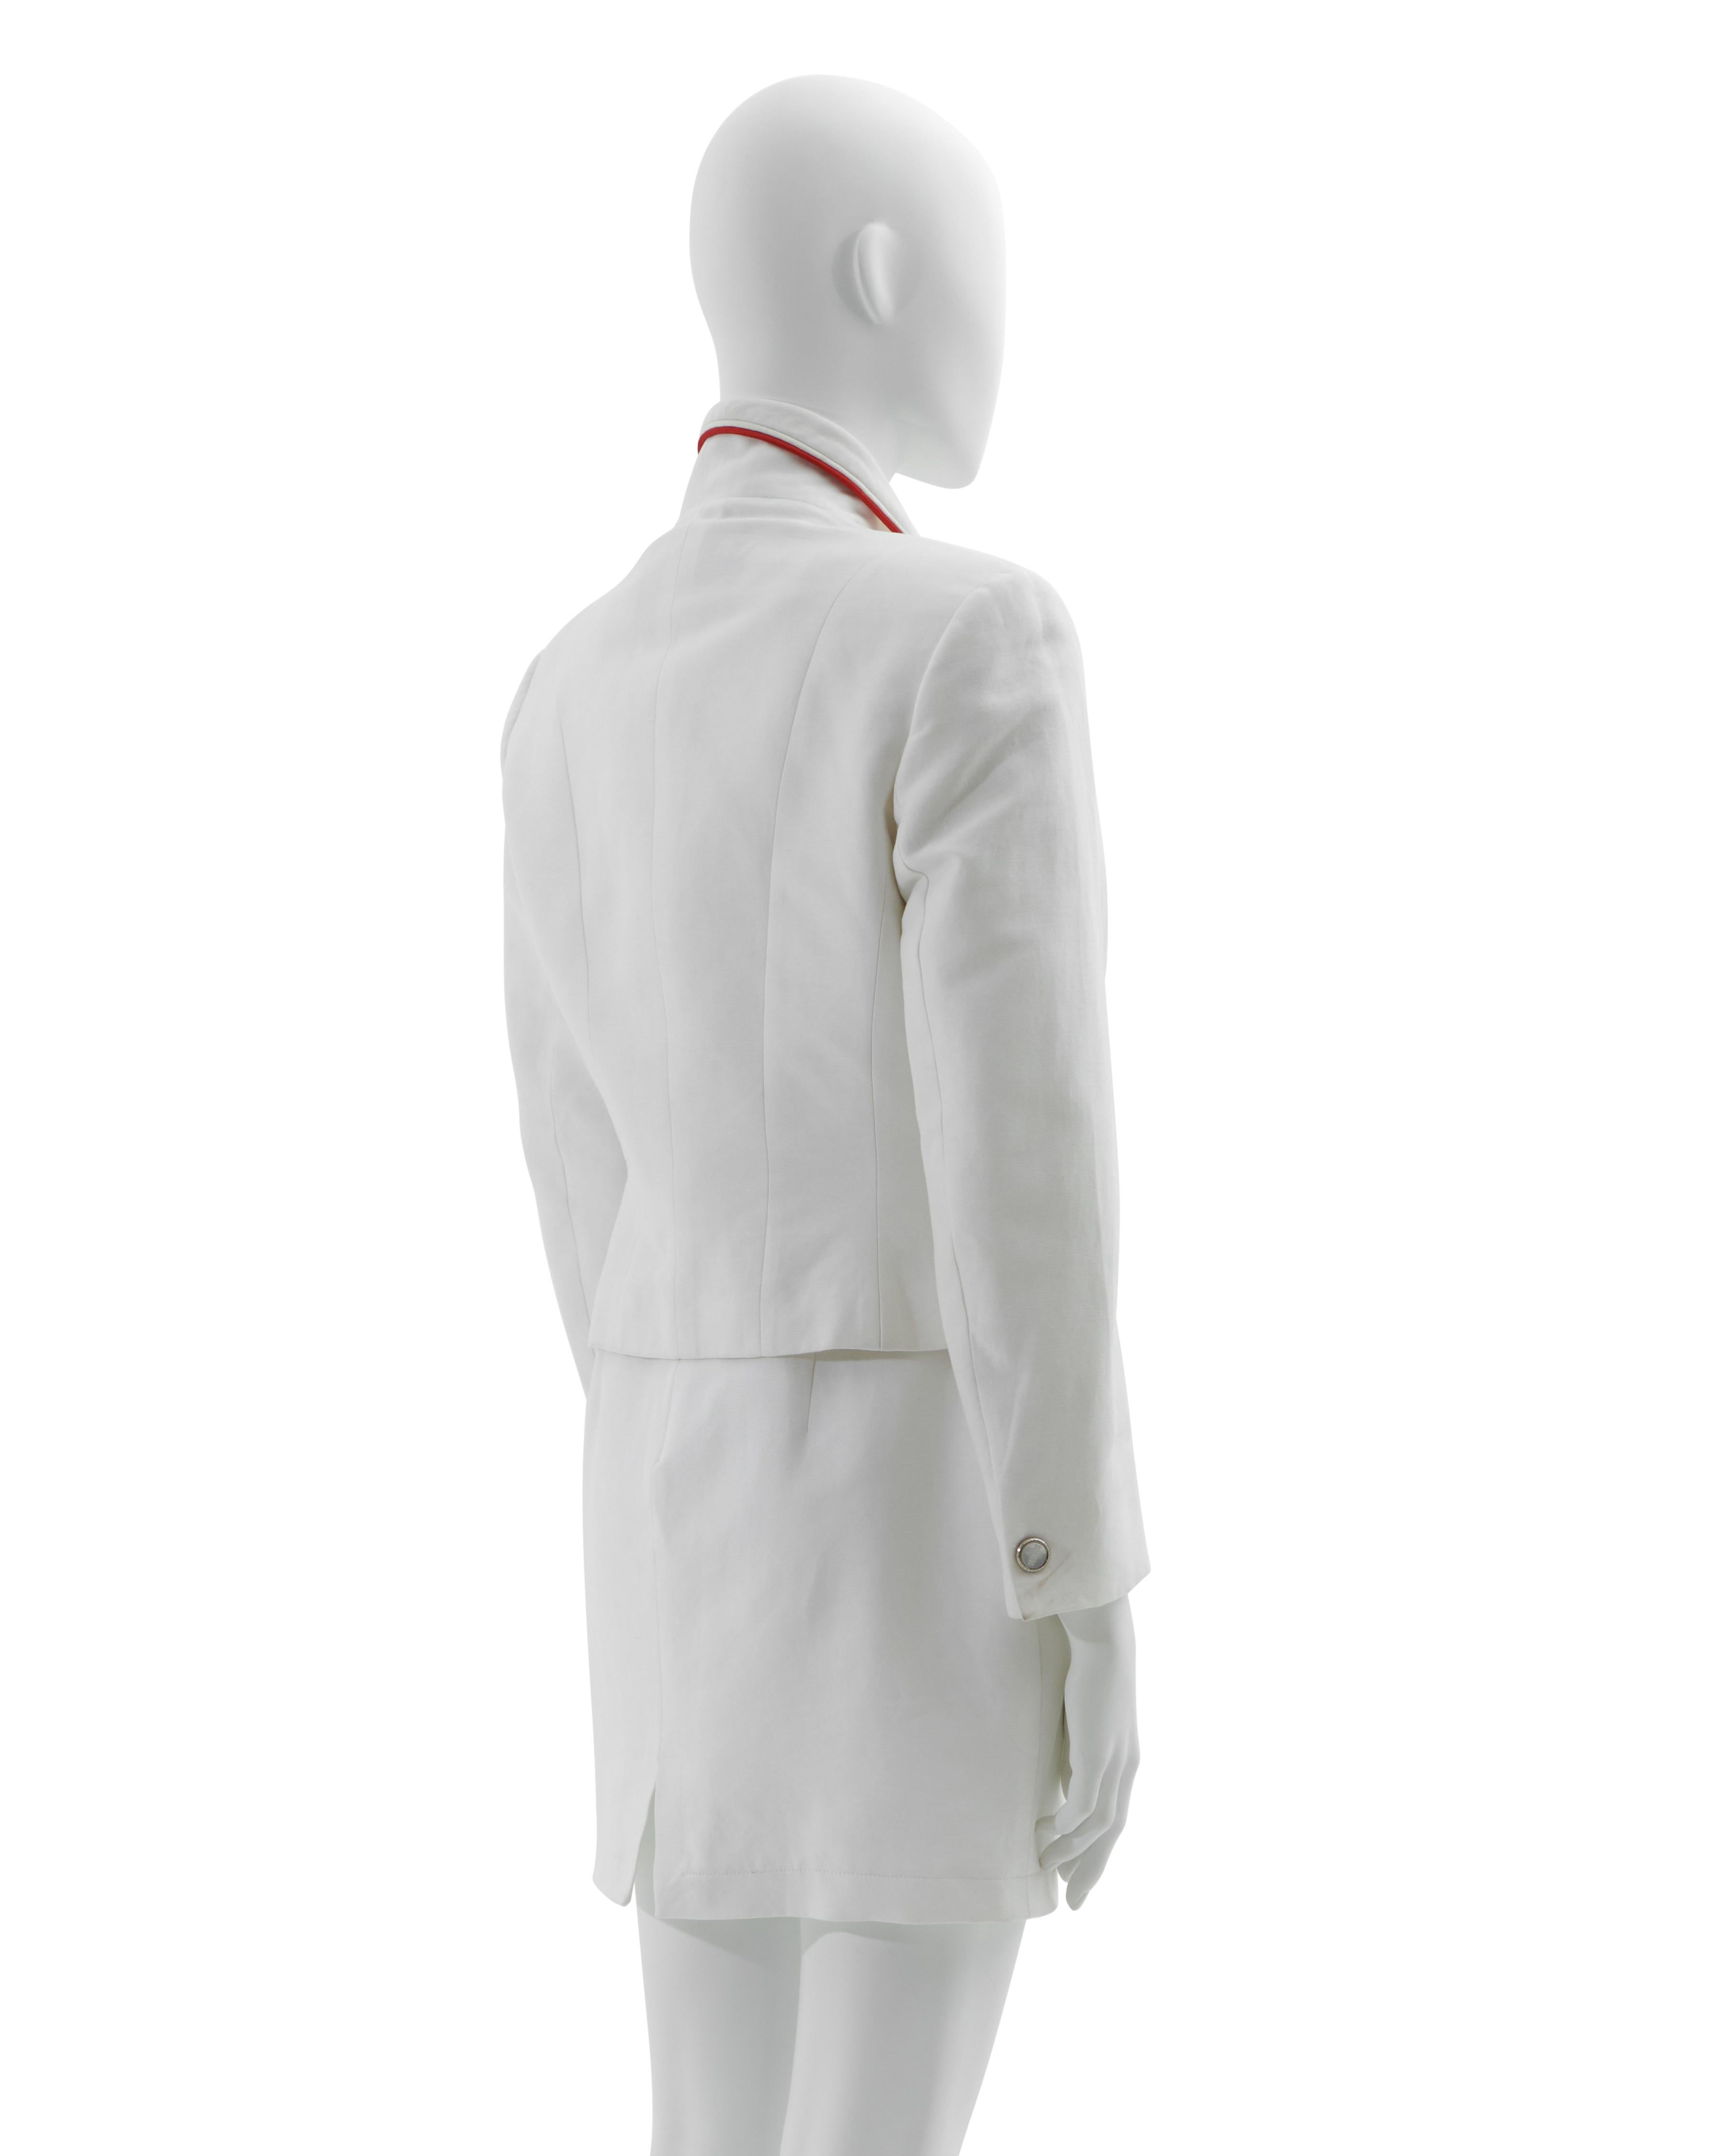 Women's Versus by Gianni Versace Early 1990s White cotton dress and crop jacket set